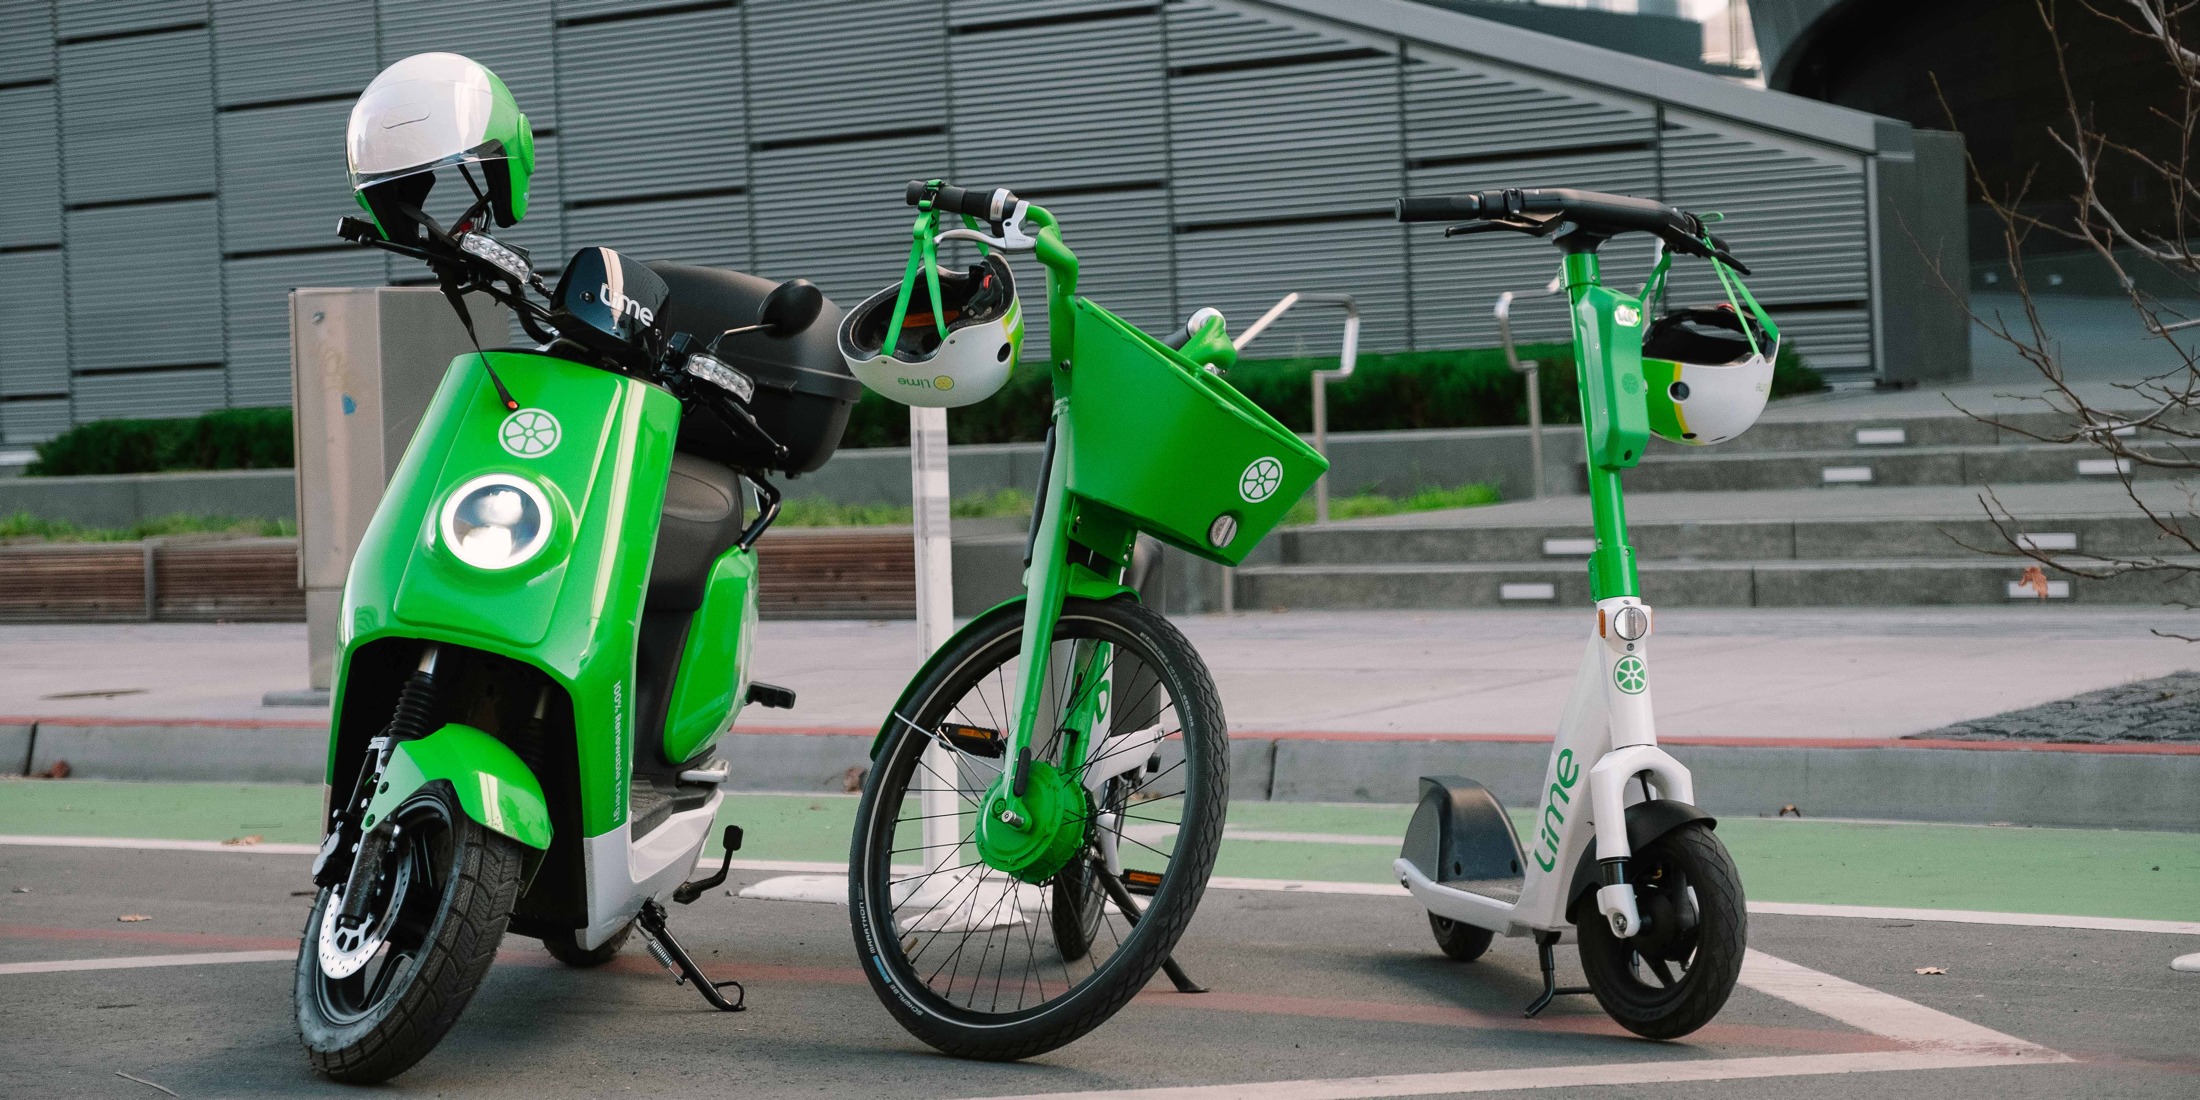 Lime adds Vespastyle seated electric scooters to its shared escooter